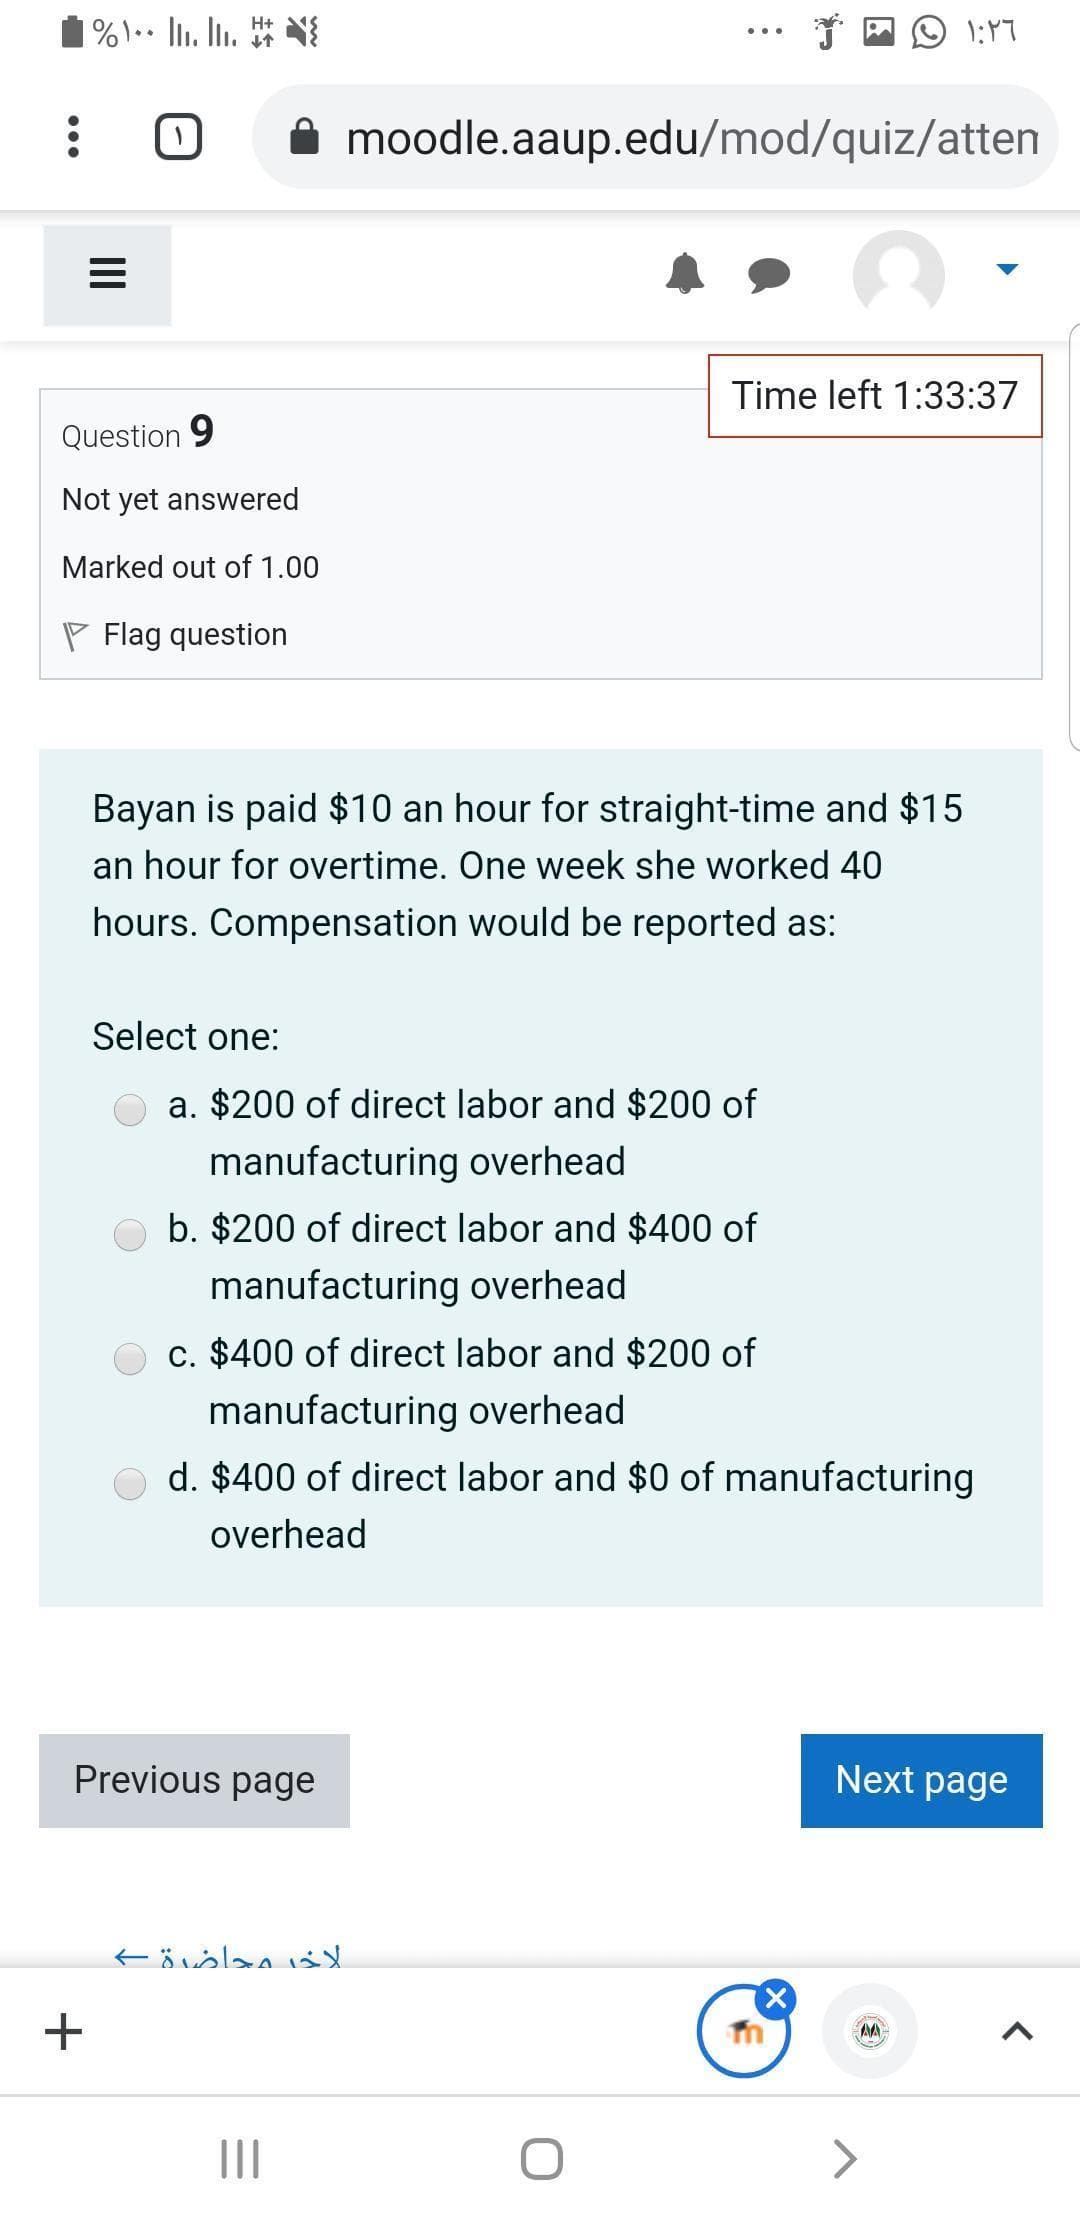 H+
moodle.aaup.edu/mod/quiz/atten
Time left 1:33:37
Question 9
Not yet answered
Marked out of 1.00
P Flag question
Bayan is paid $10 an hour for straight-time and $15
an hour for overtime. One week she worked 40
hours. Compensation would be reported as:
Select one:
a. $200 of direct labor and $200 of
manufacturing overhead
b. $200 of direct labor and $400 of
manufacturing overhead
c. $400 of direct labor and $200 of
manufacturing overhead
d. $400 of direct labor and $0 of manufacturing
overhead
Previous page
Next page
II
II
